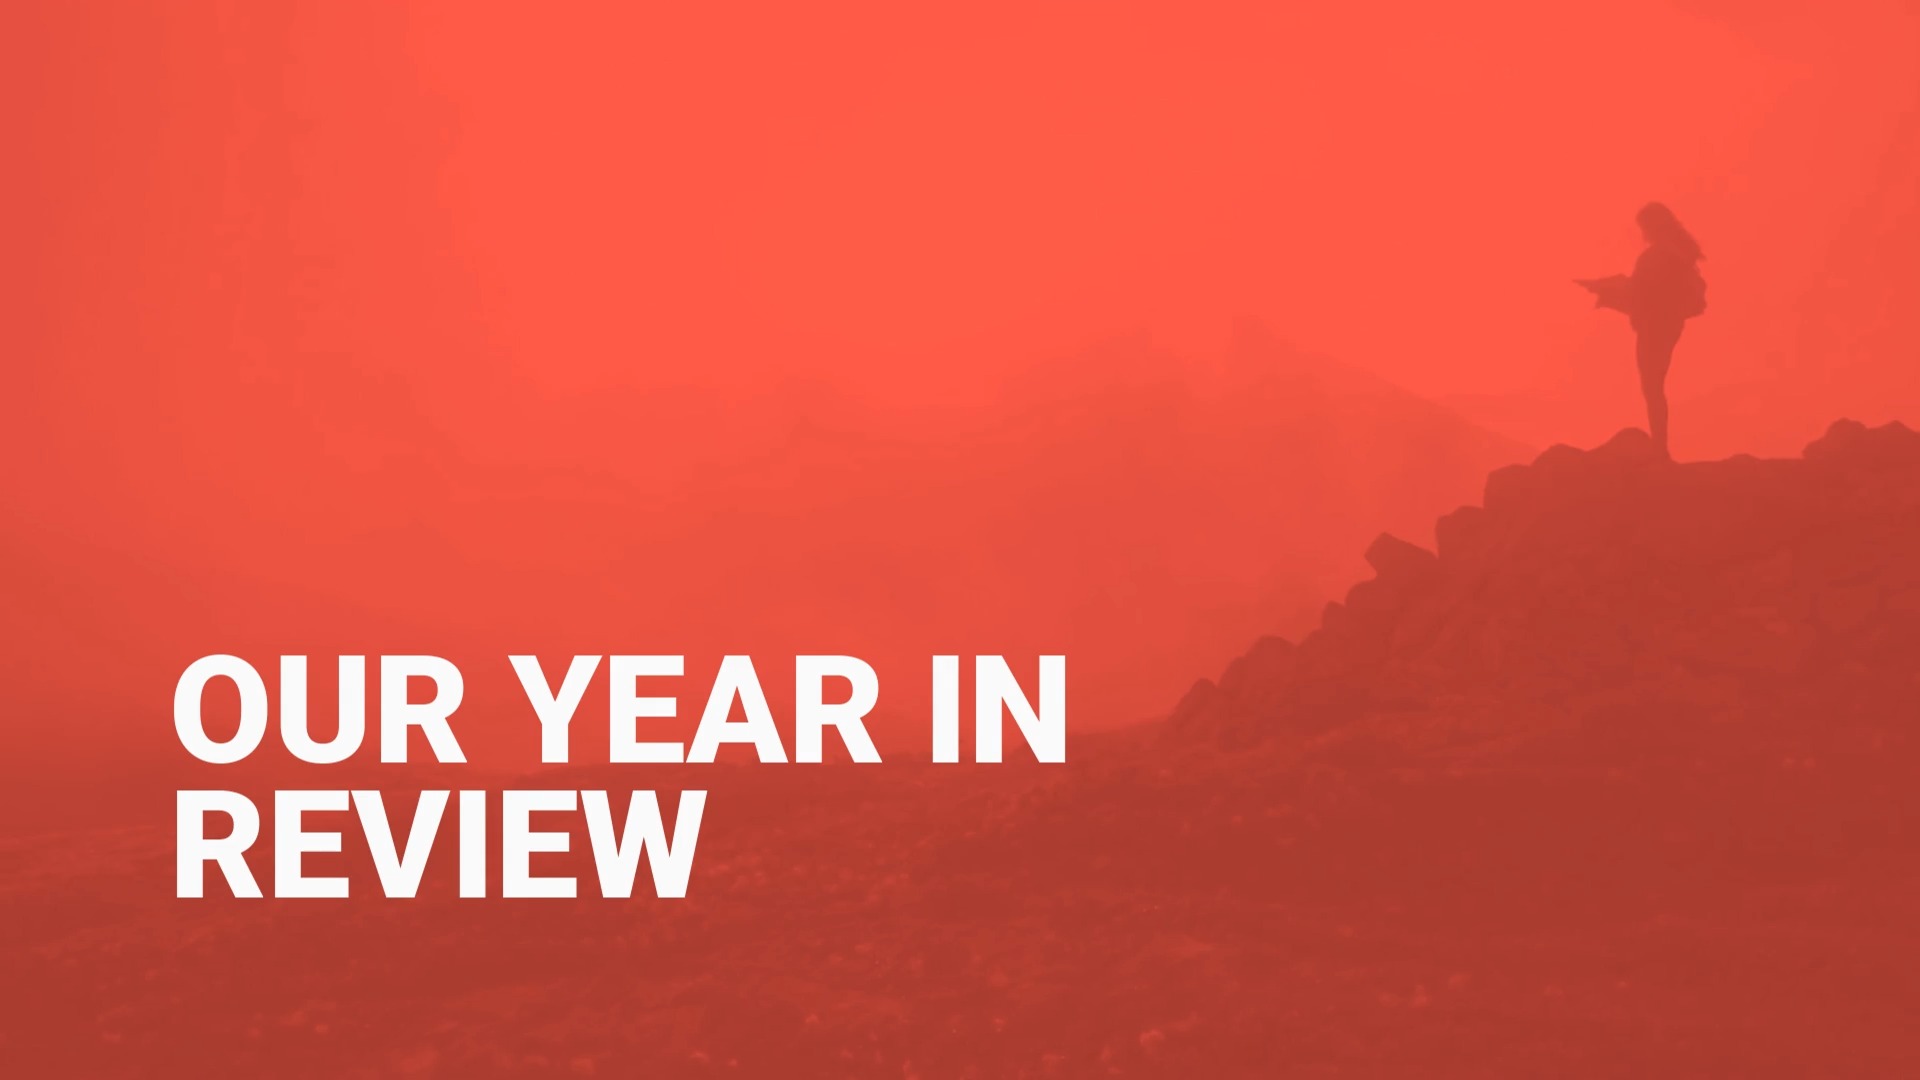 The Year In Review